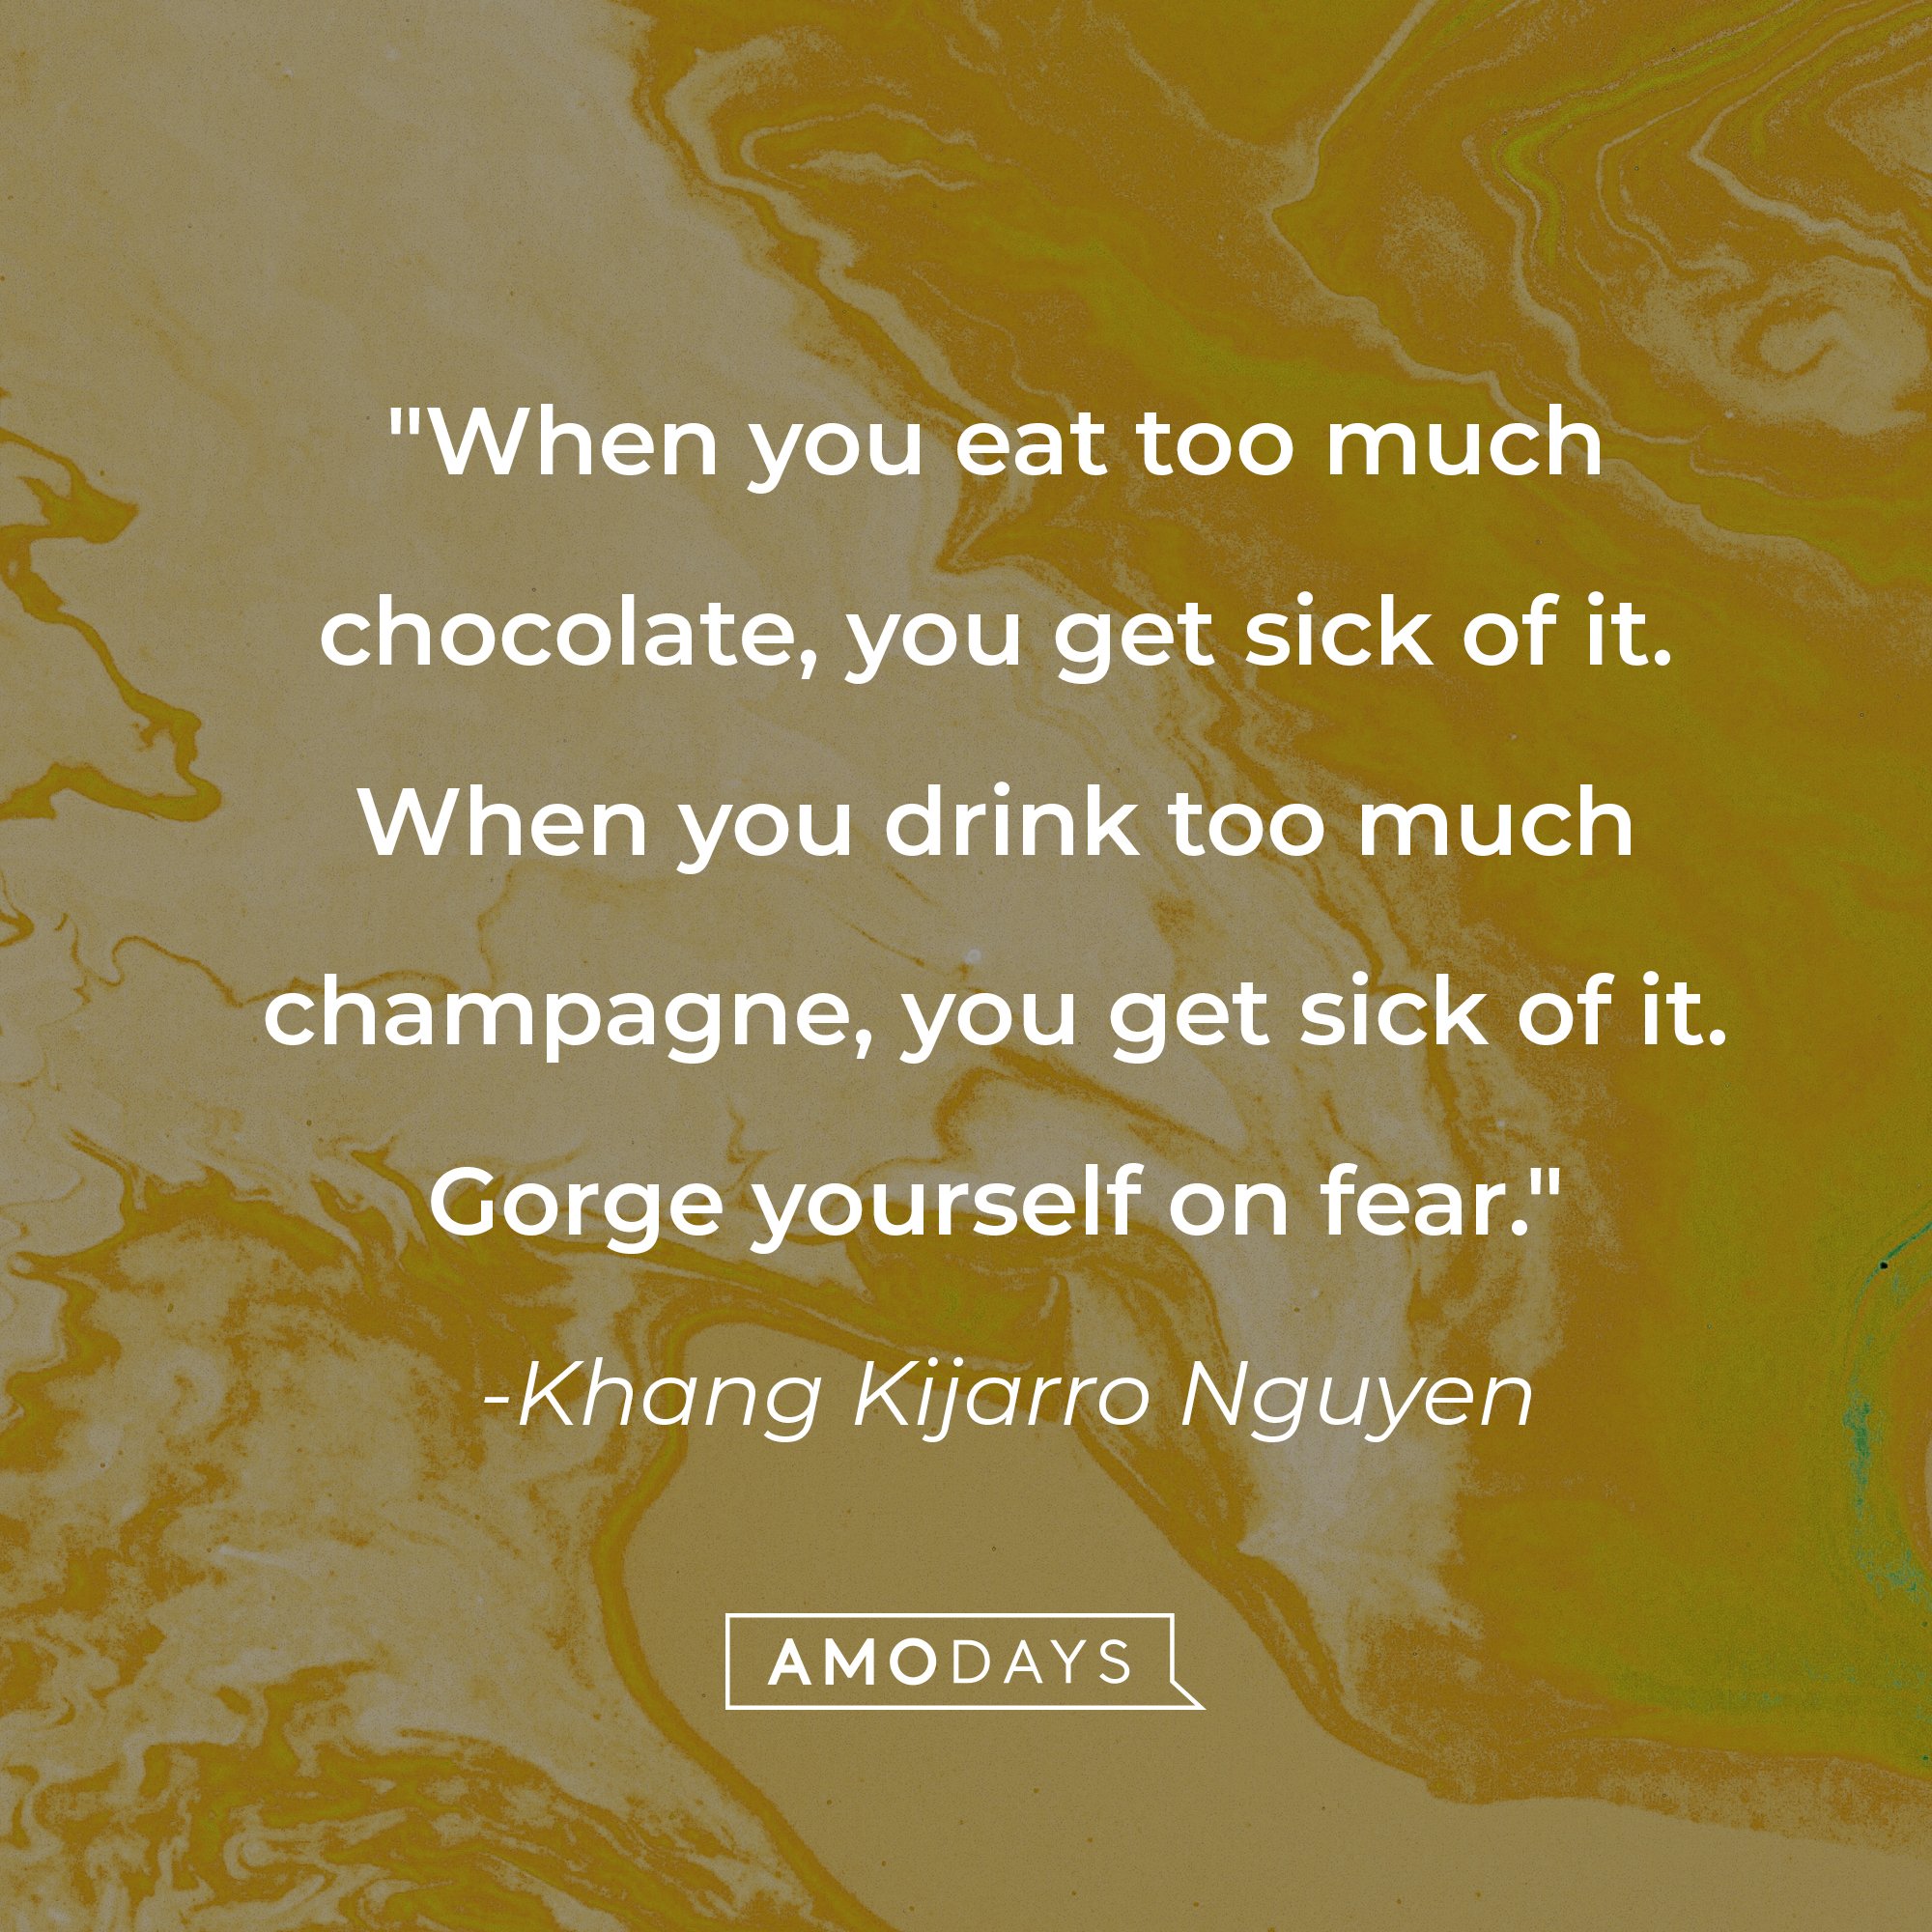 Khang Kijarro Nguyen's quote: "When you eat too much chocolate, you get sick of it. When you drink too much champagne, you get sick of it. Gorge yourself on fear." | Source: AmoDays